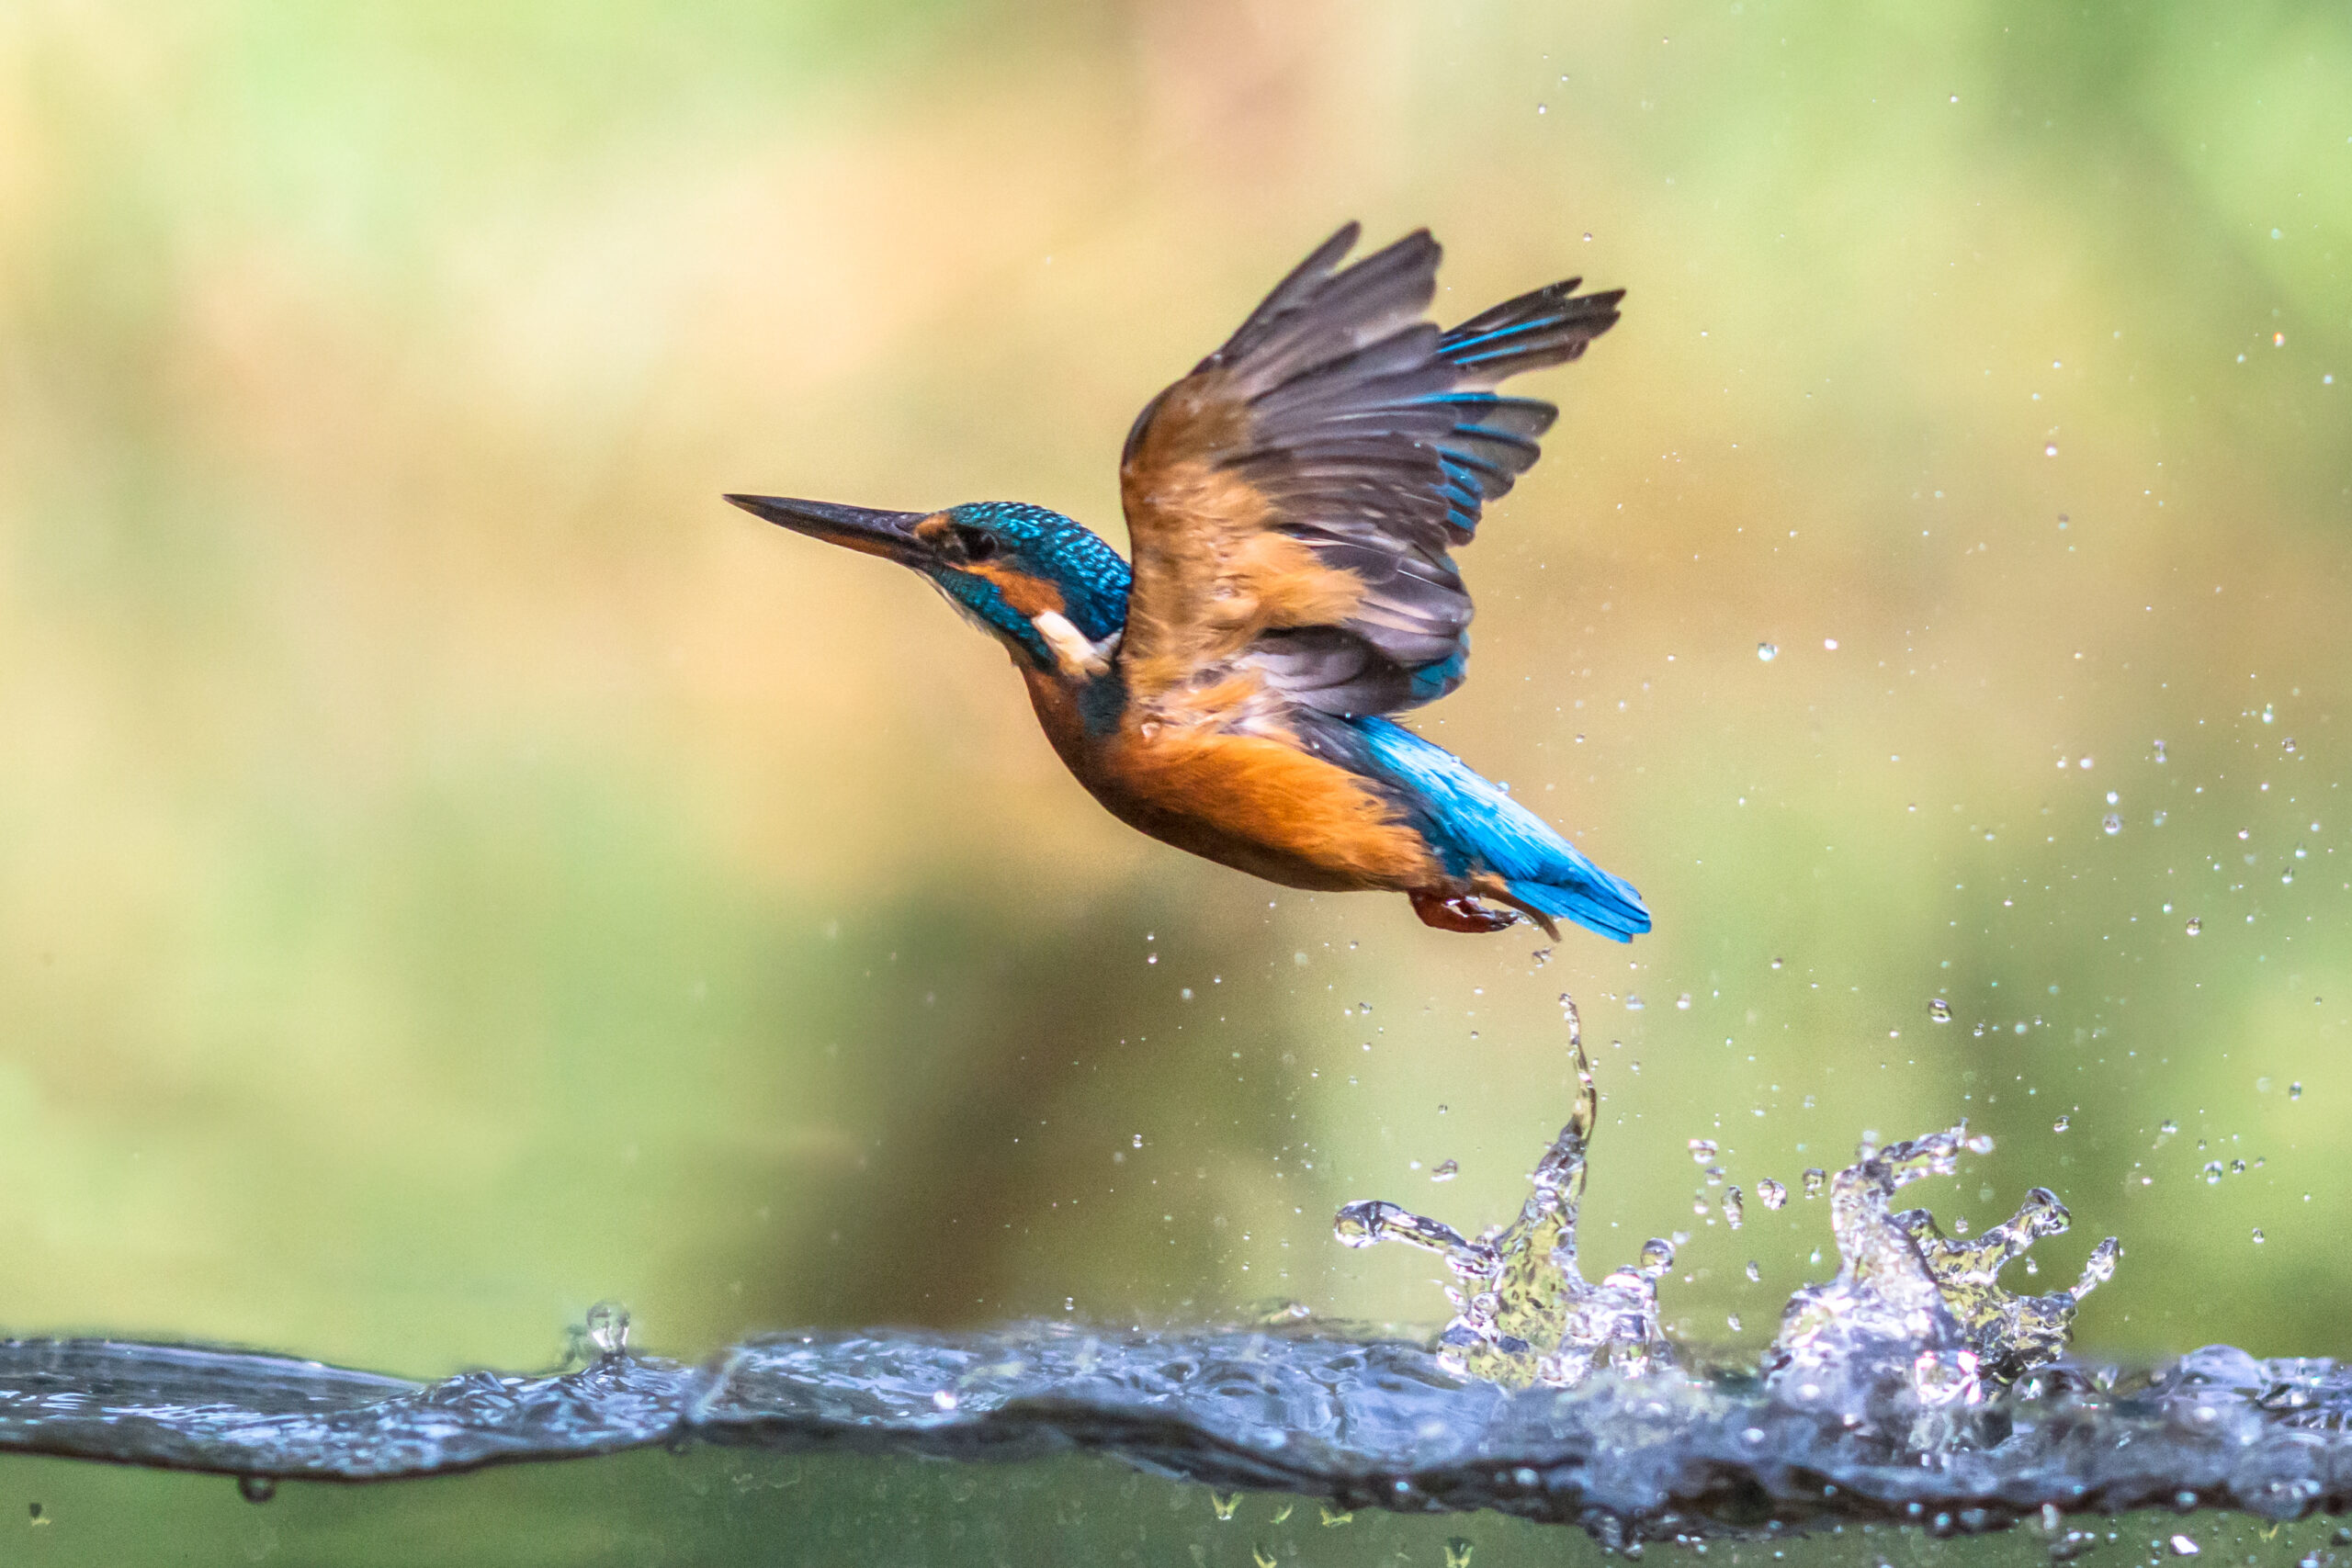 river kingfisher diving and emerging from water and flying back to lookout post